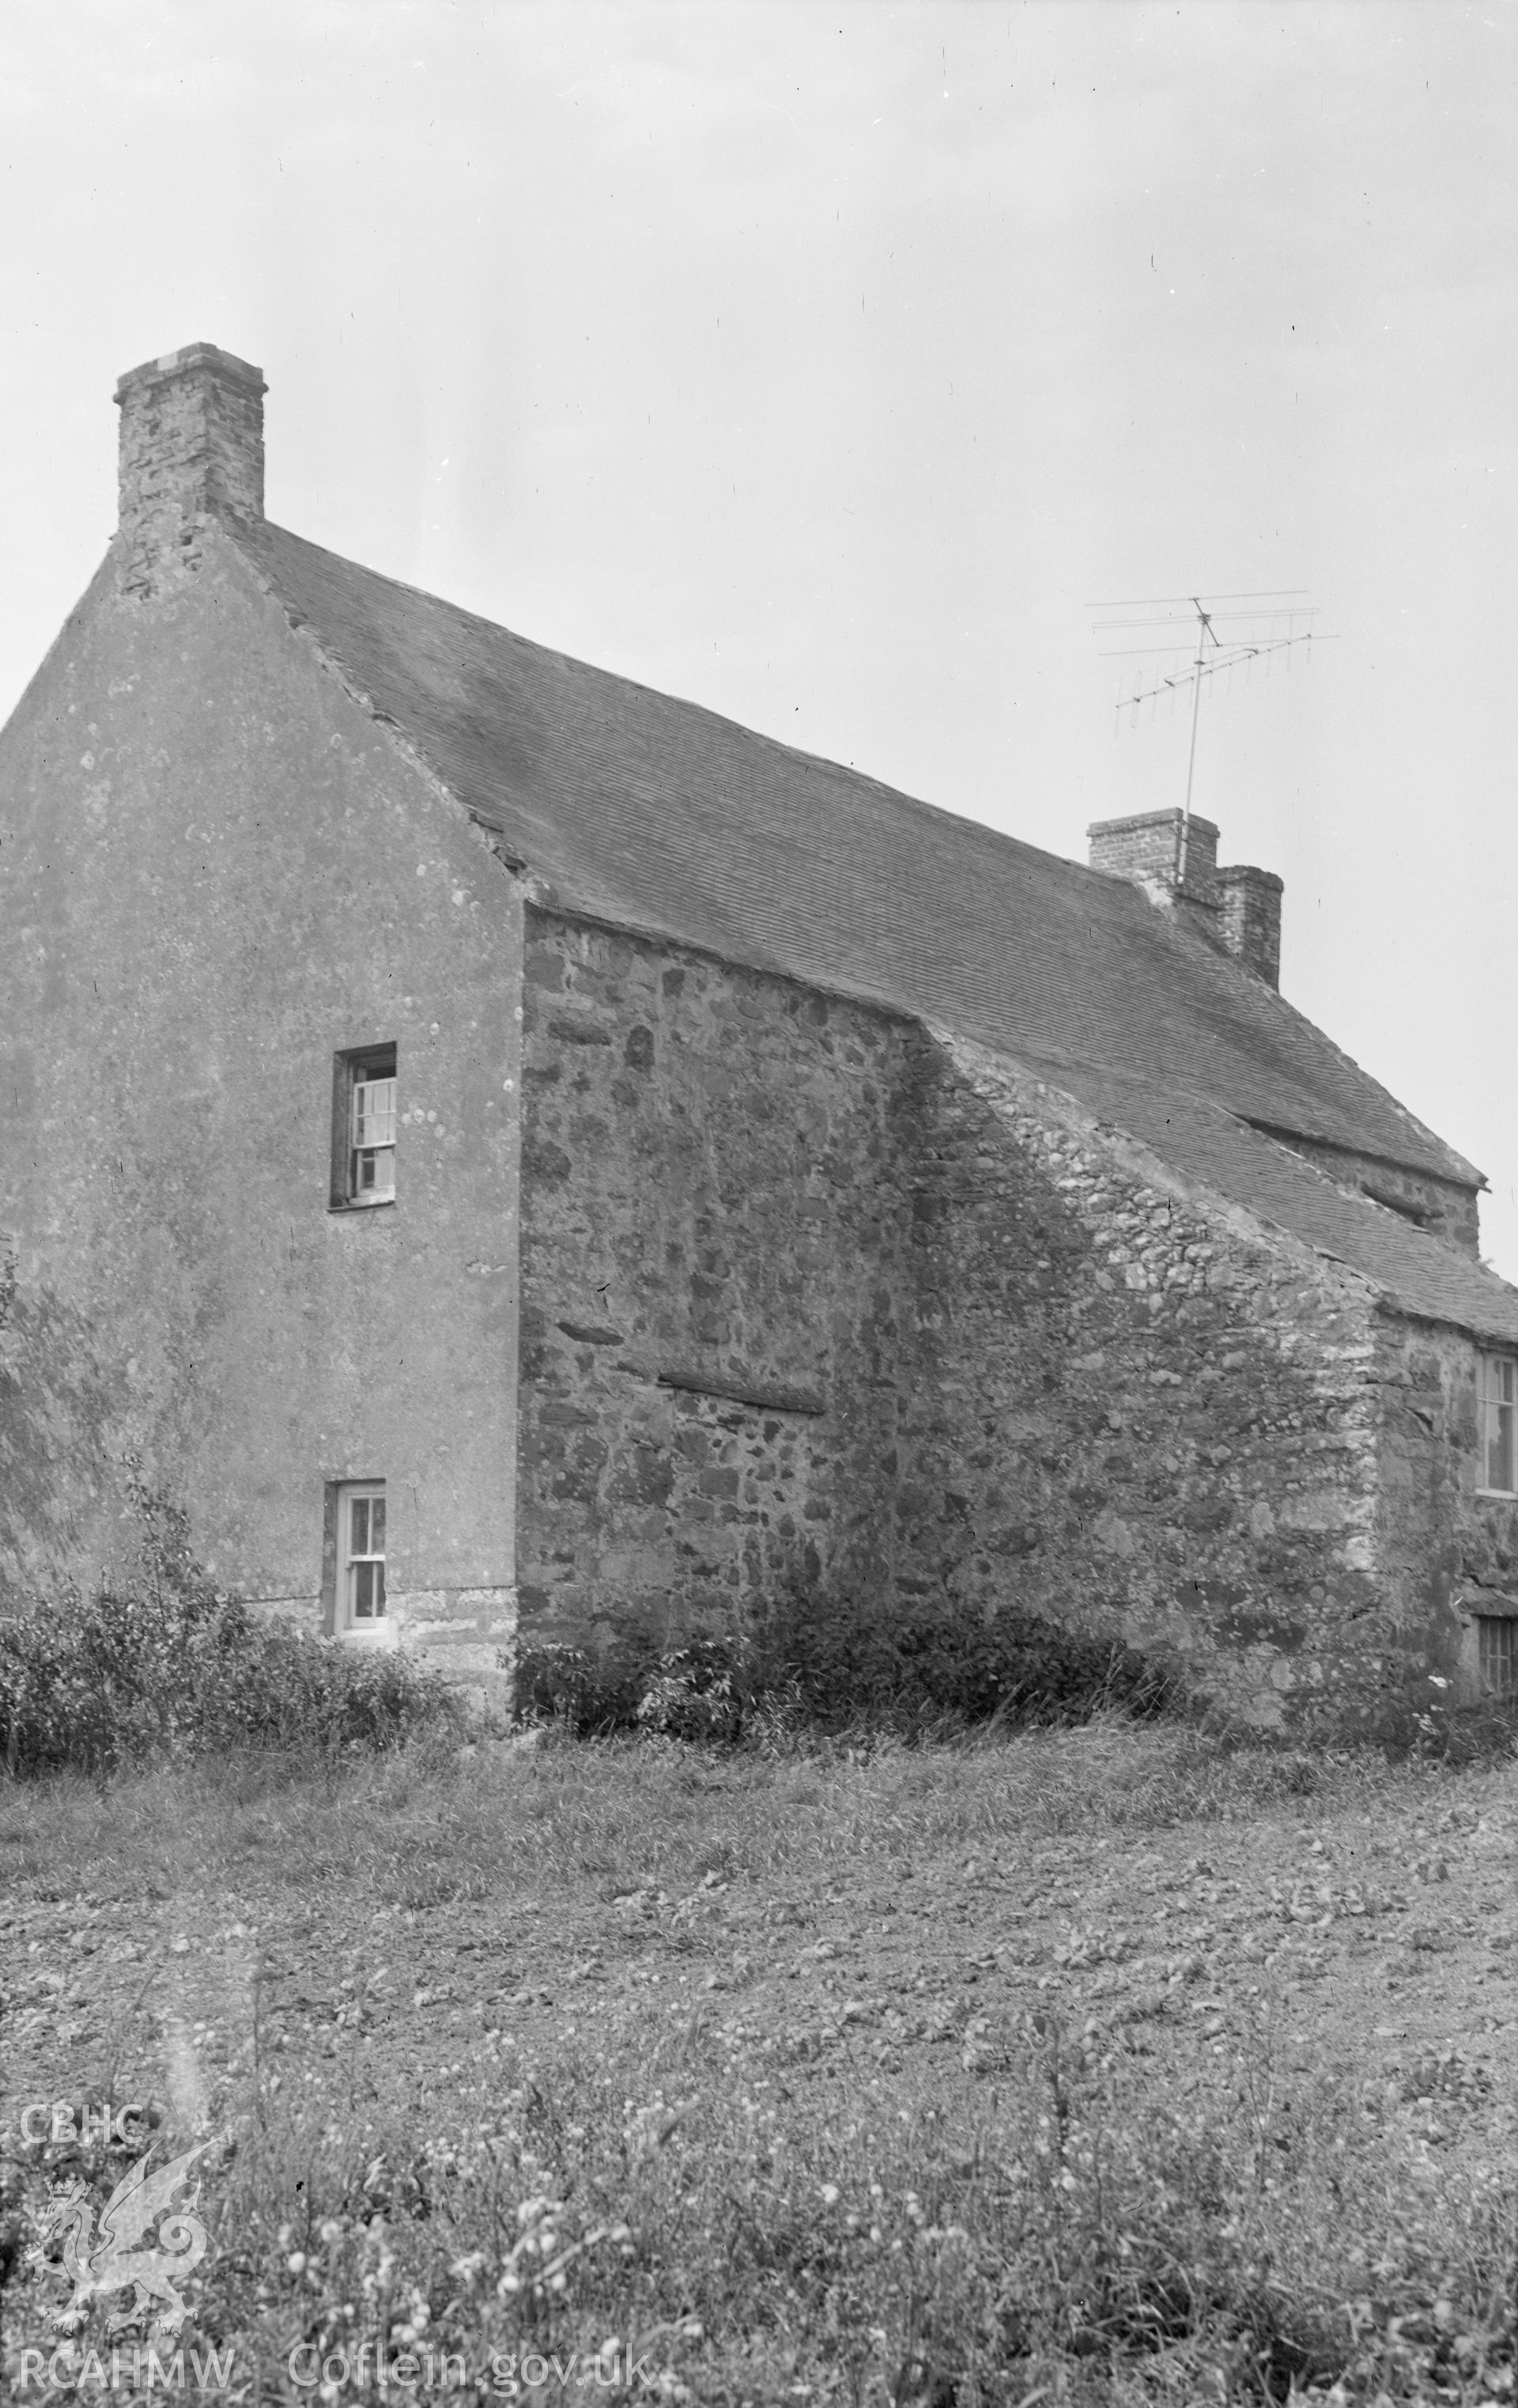 Black and white nitrate negative showing exterior view of Llanerch.